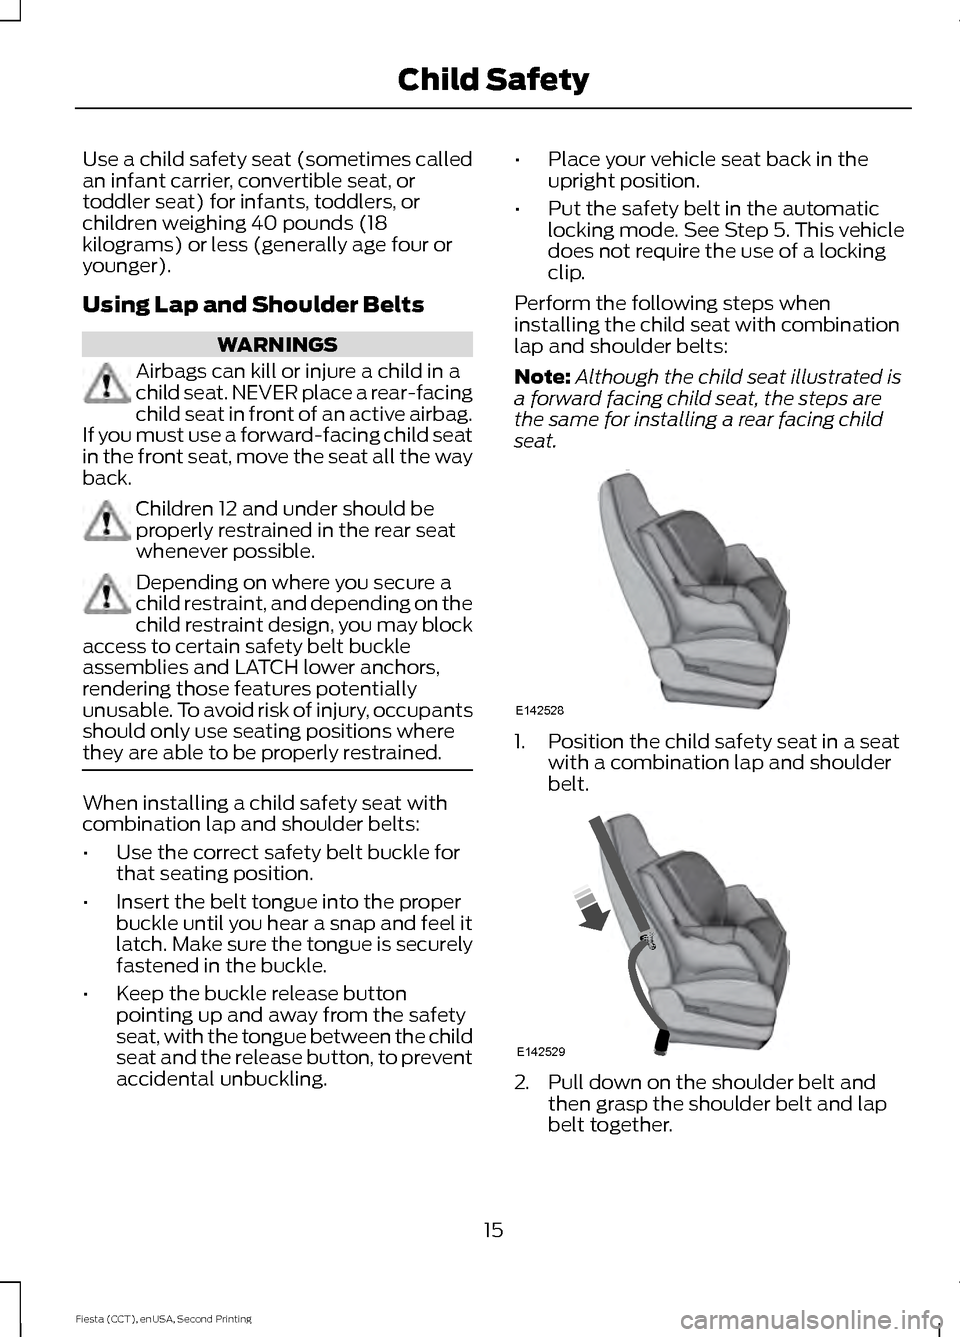 FORD FIESTA 2015 6.G Owners Manual Use a child safety seat (sometimes called
an infant carrier, convertible seat, or
toddler seat) for infants, toddlers, or
children weighing 40 pounds (18
kilograms) or less (generally age four or
youn